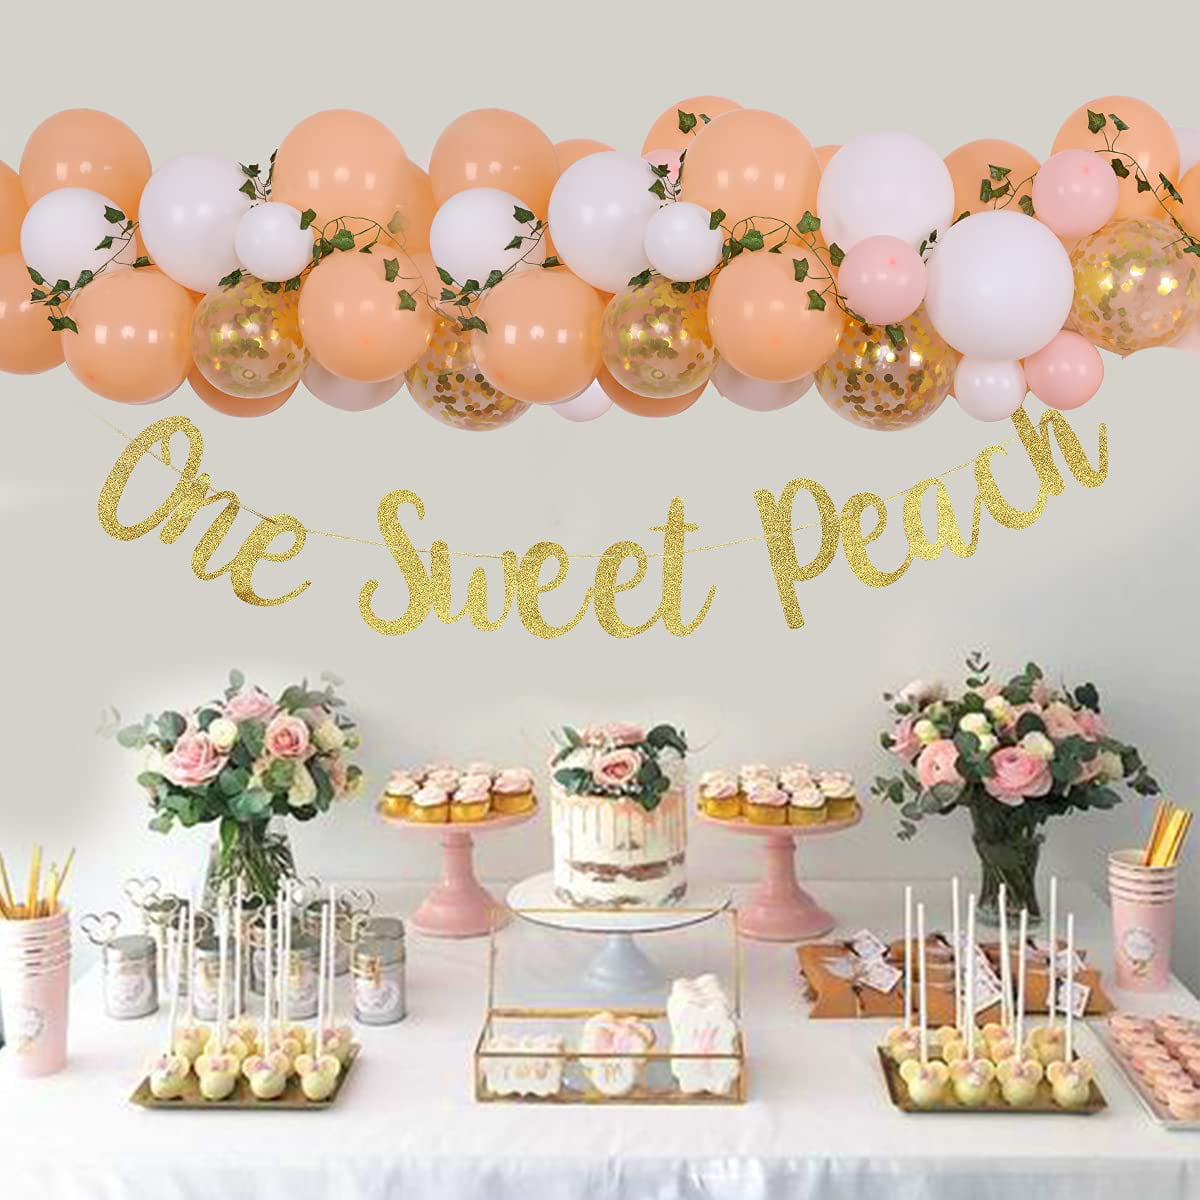 Peach Party Decorations: How To Throw A Peach Party! - NeonGrand